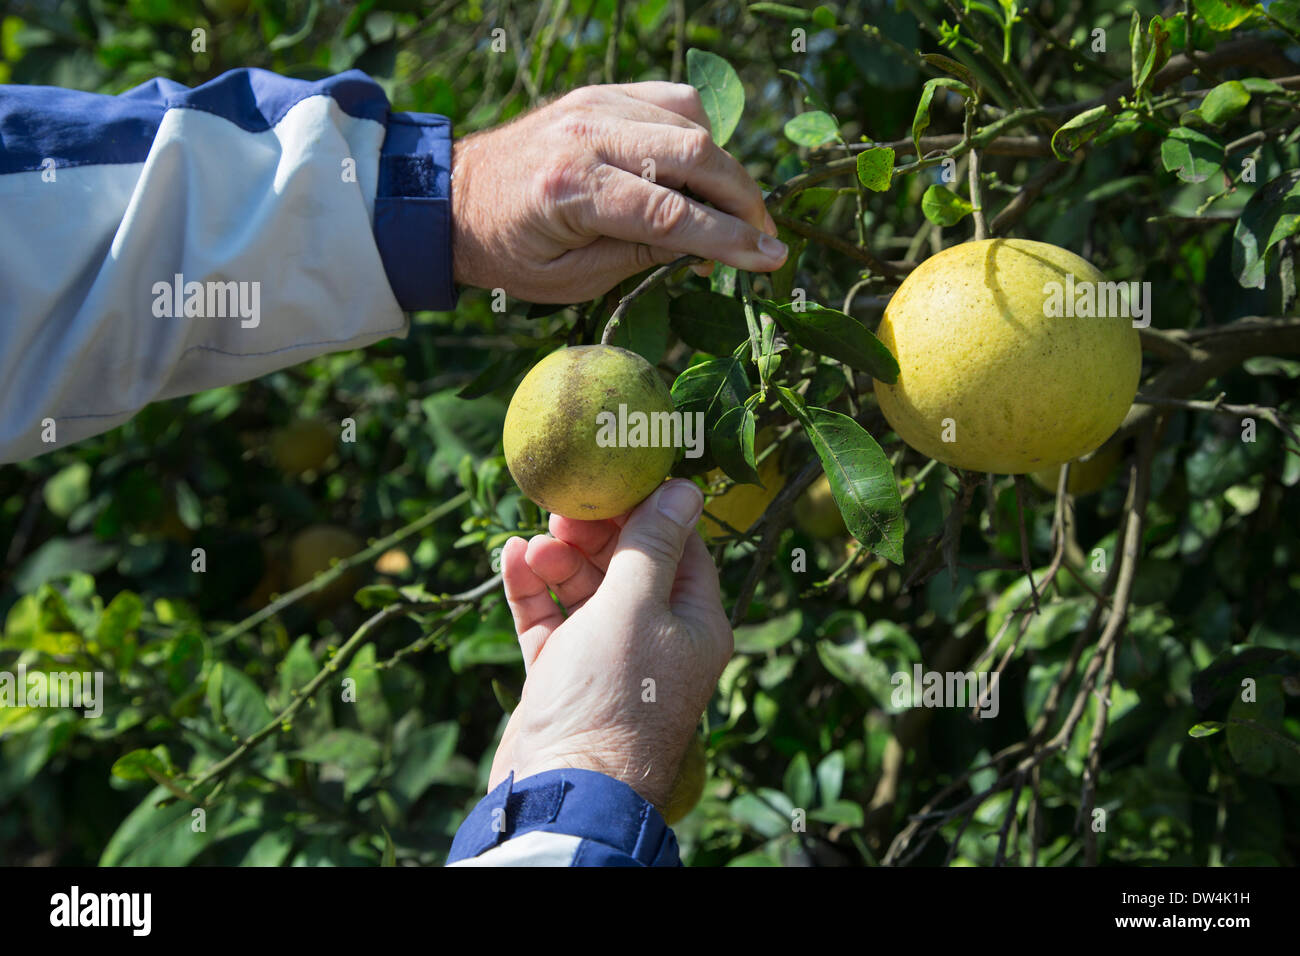 Citrus greening disease affects a grapefruit tree in the Indian River Citrus District on Florida's east coast. Stock Photo